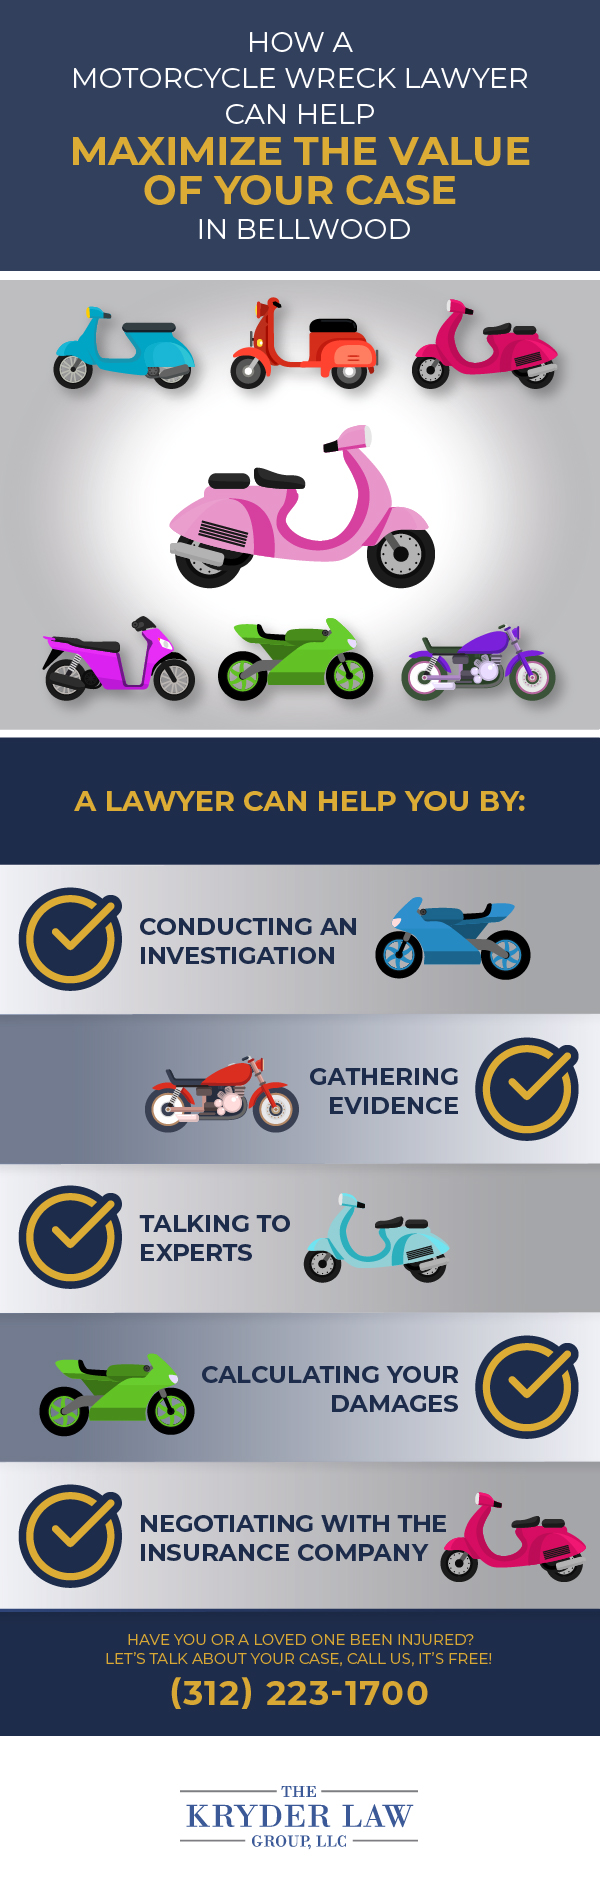 How a Motorcycle Wreck Lawyer Can Help Maximize the Value of Your Case in Bellwood Infographic